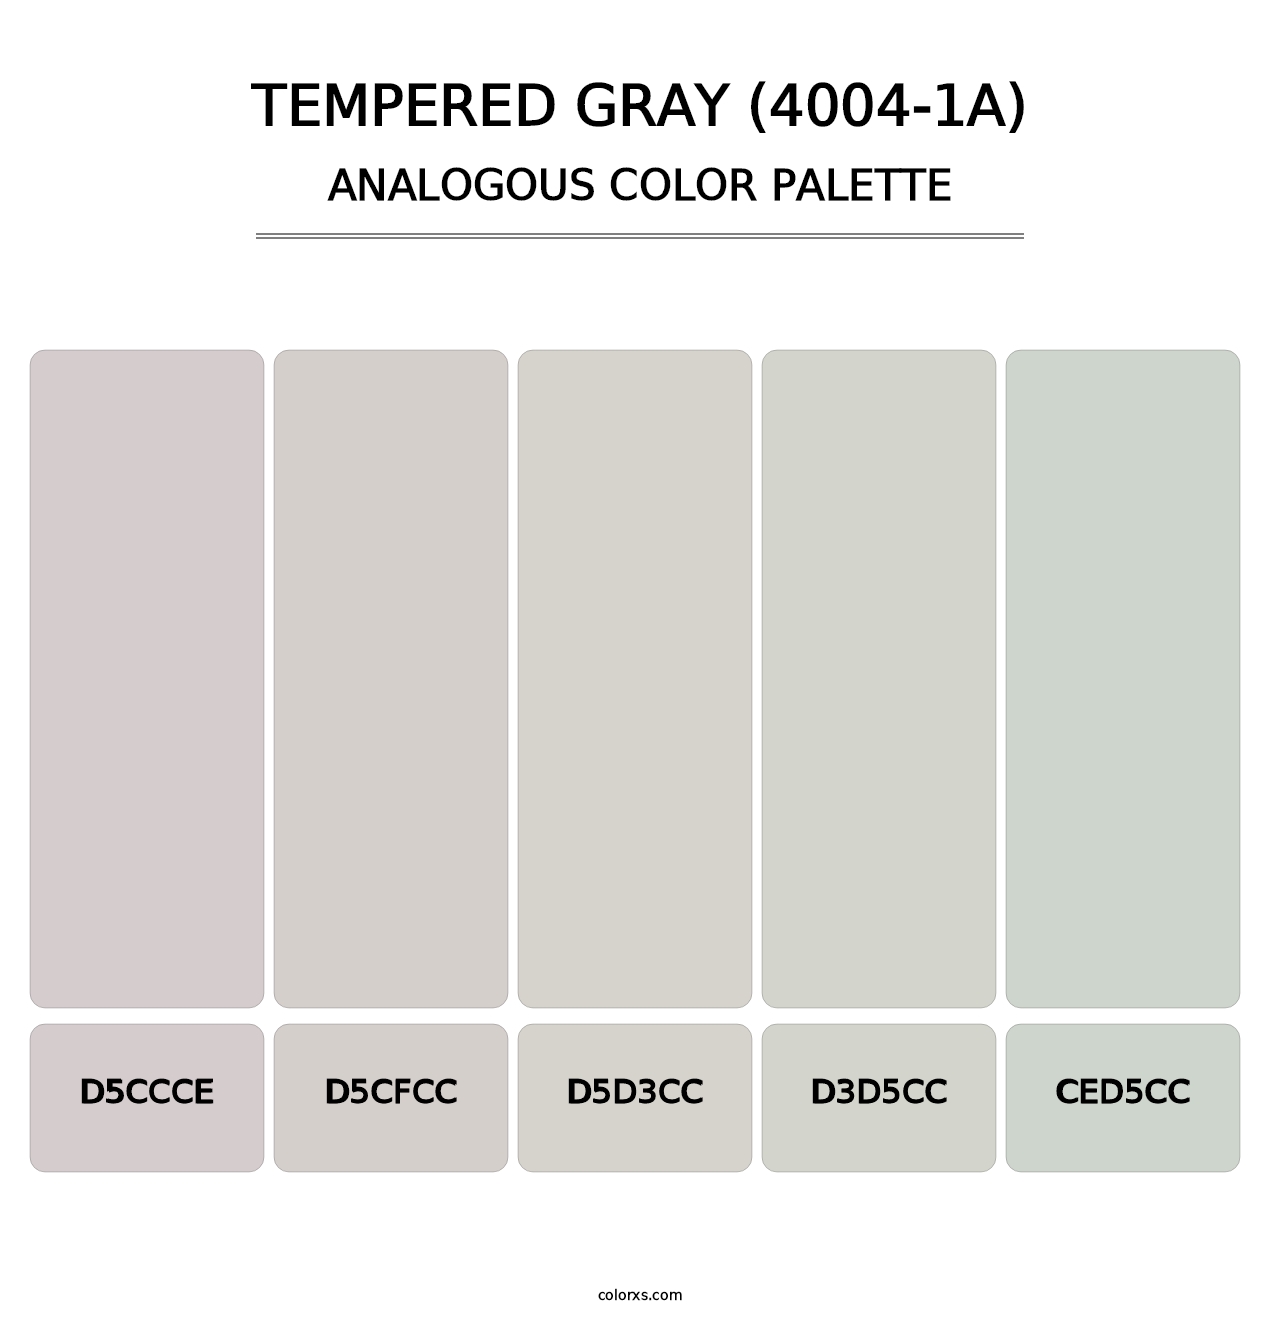 Tempered Gray (4004-1A) - Analogous Color Palette